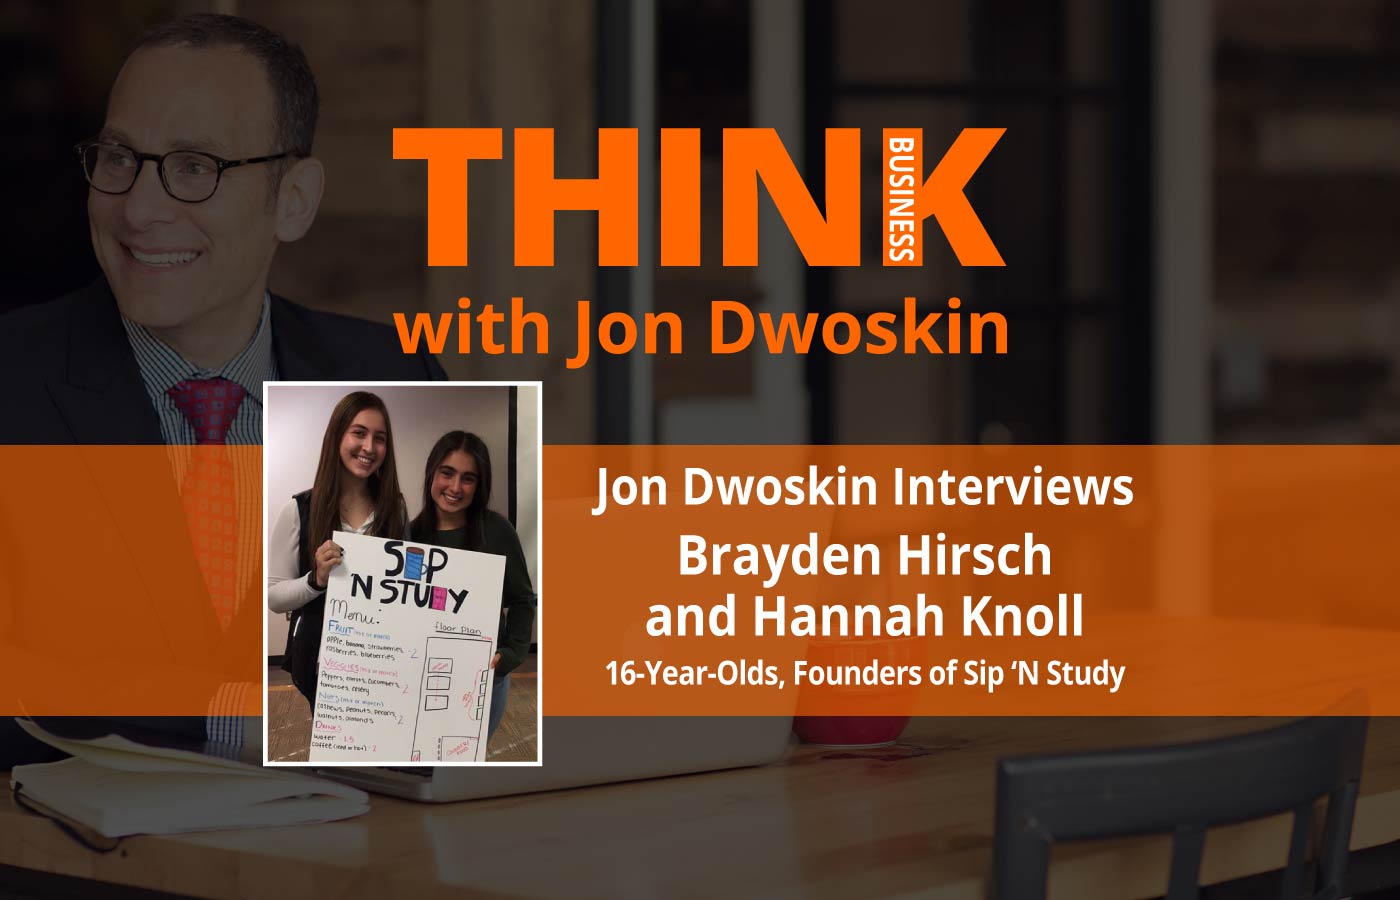 THINK Business Podcast: Jon Dwoskin Interviews Brayden Hirsch and Hannah Knoll, 16-Year-Olds, Founders of Sip ‘N Study 